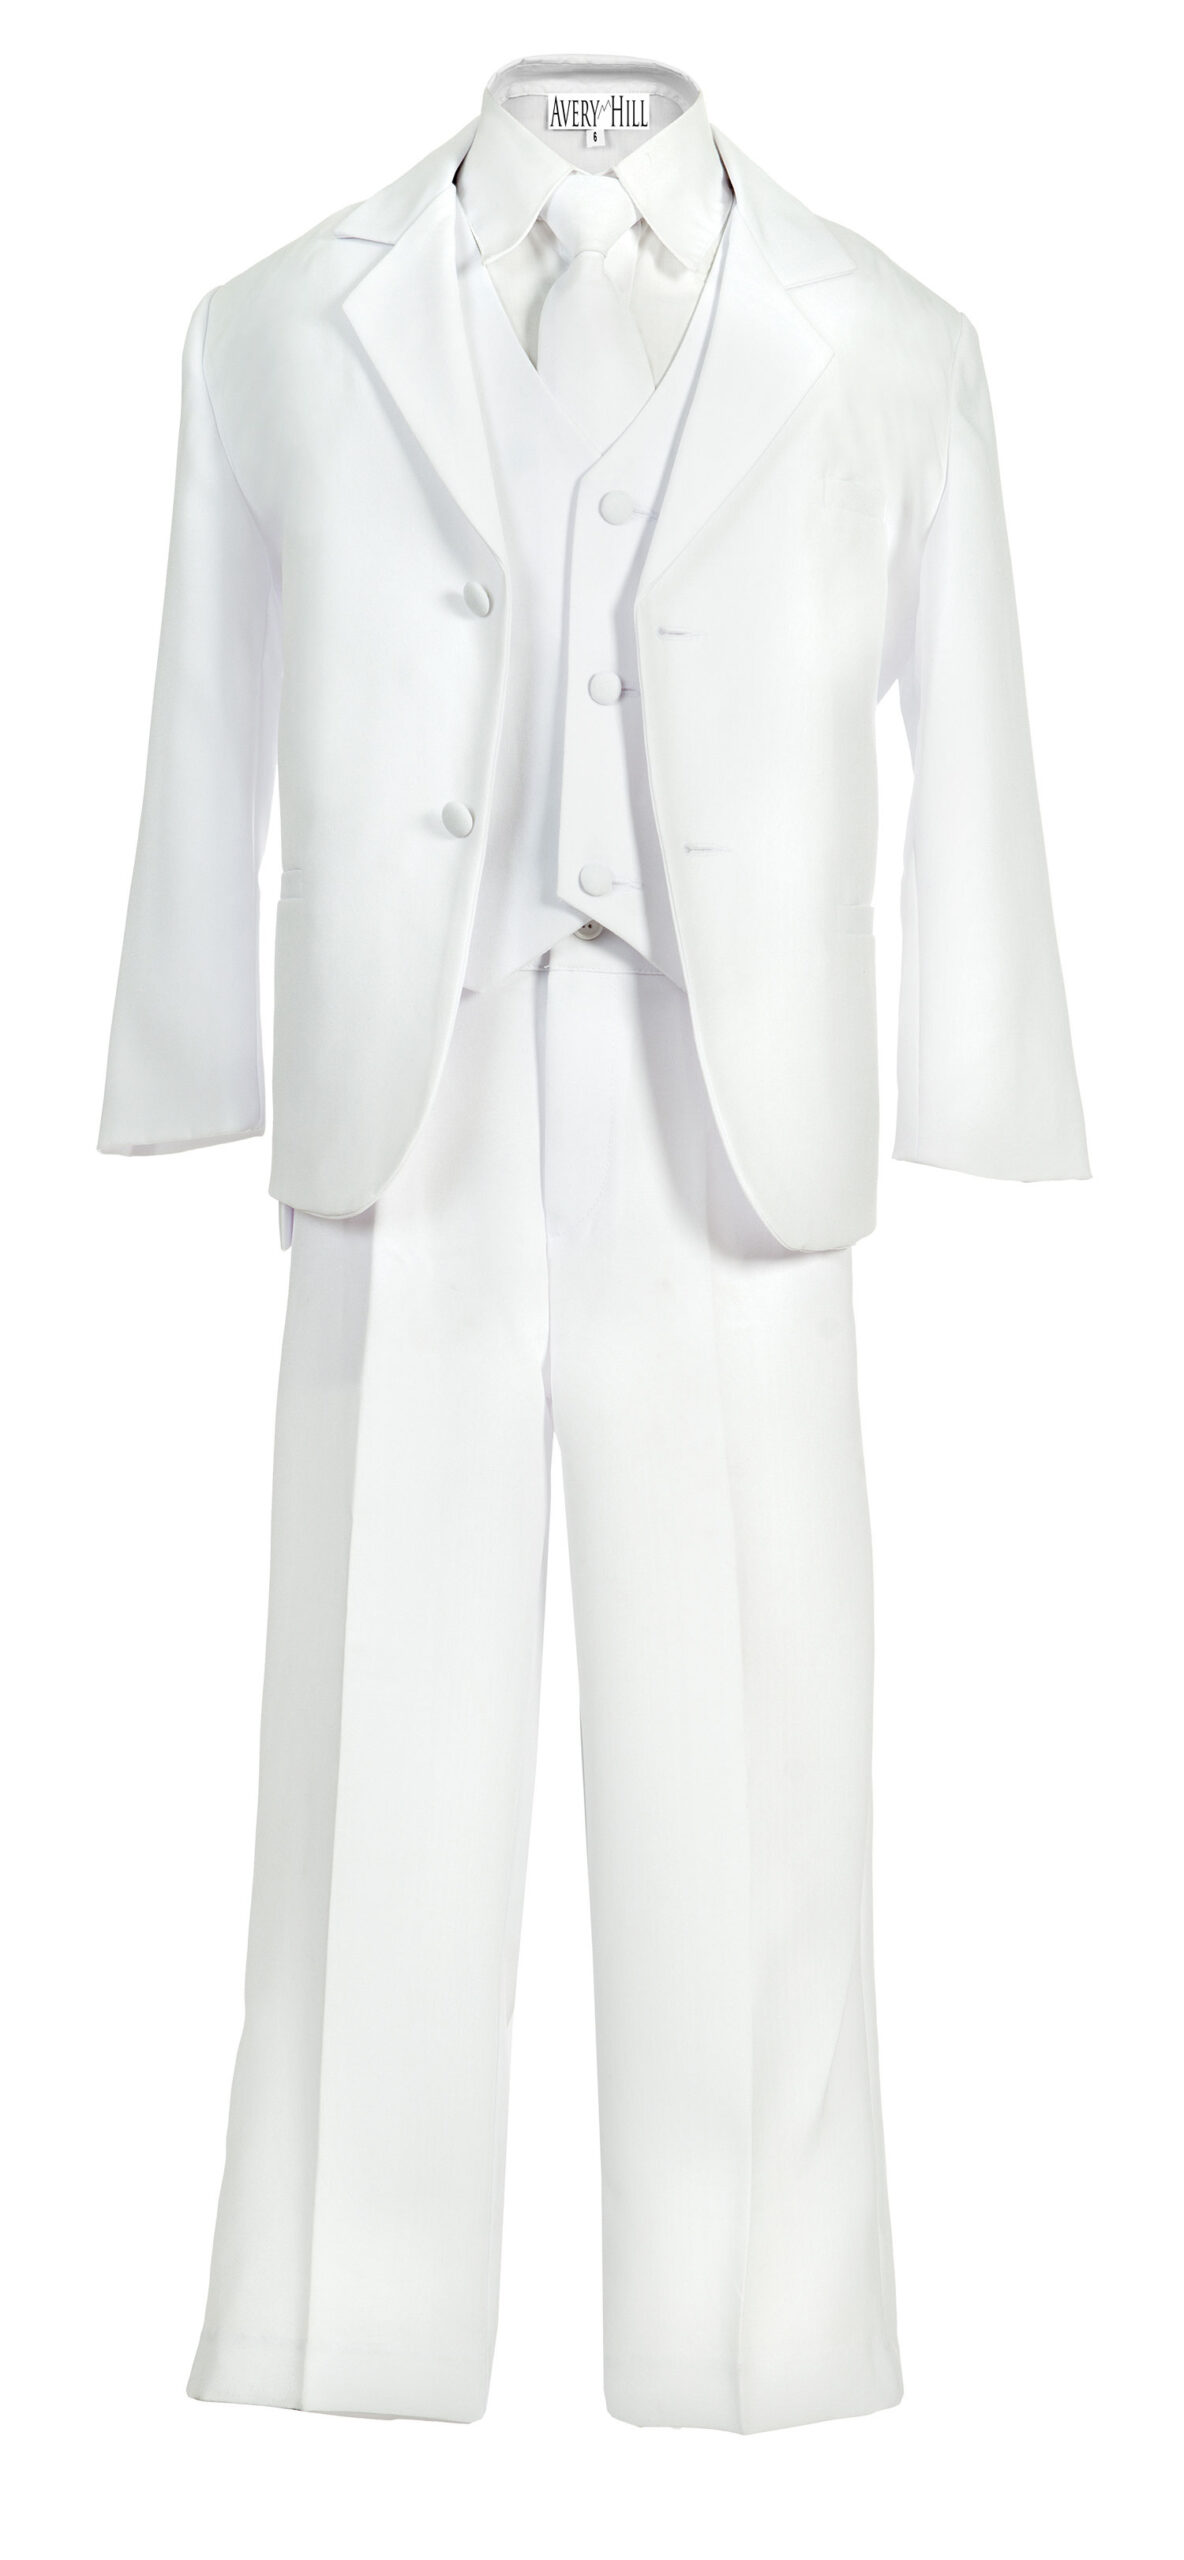 Avery Hill Boys Formal 5 Piece Suit with Shirt and Vest White - M